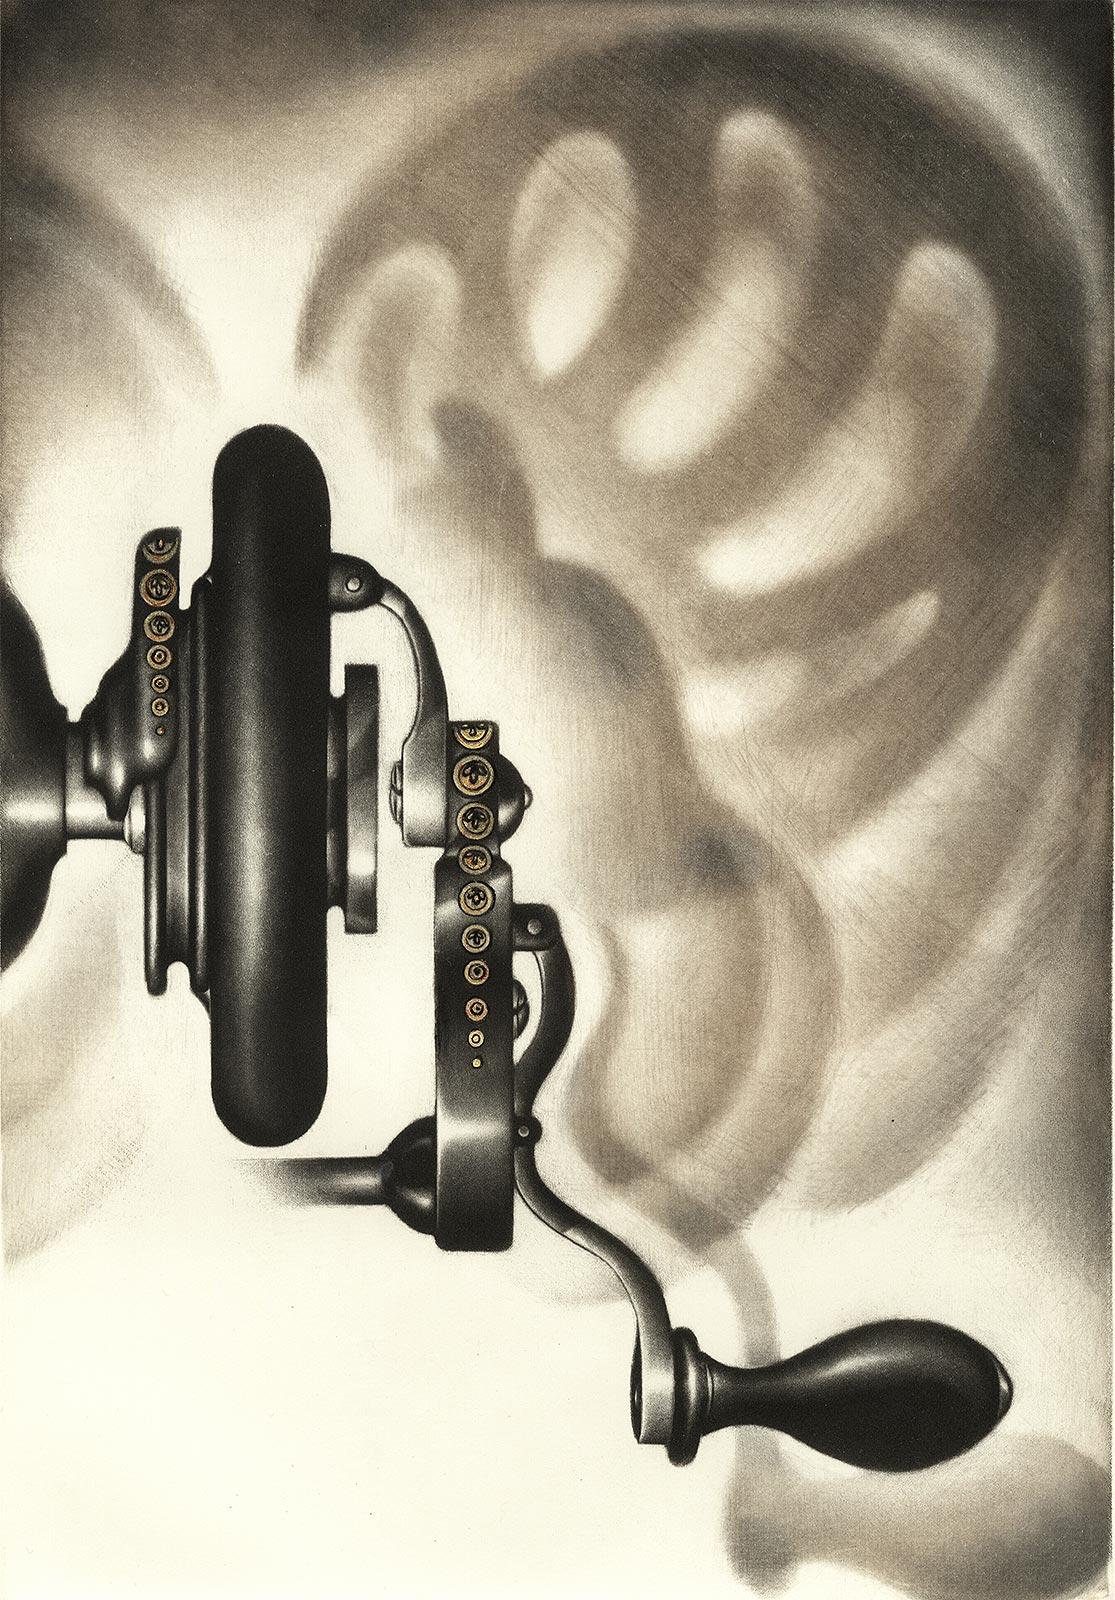 Carol Wax Still-Life Print - Singer III (The wheel turning part of a sewing machine casts shadows on wall)